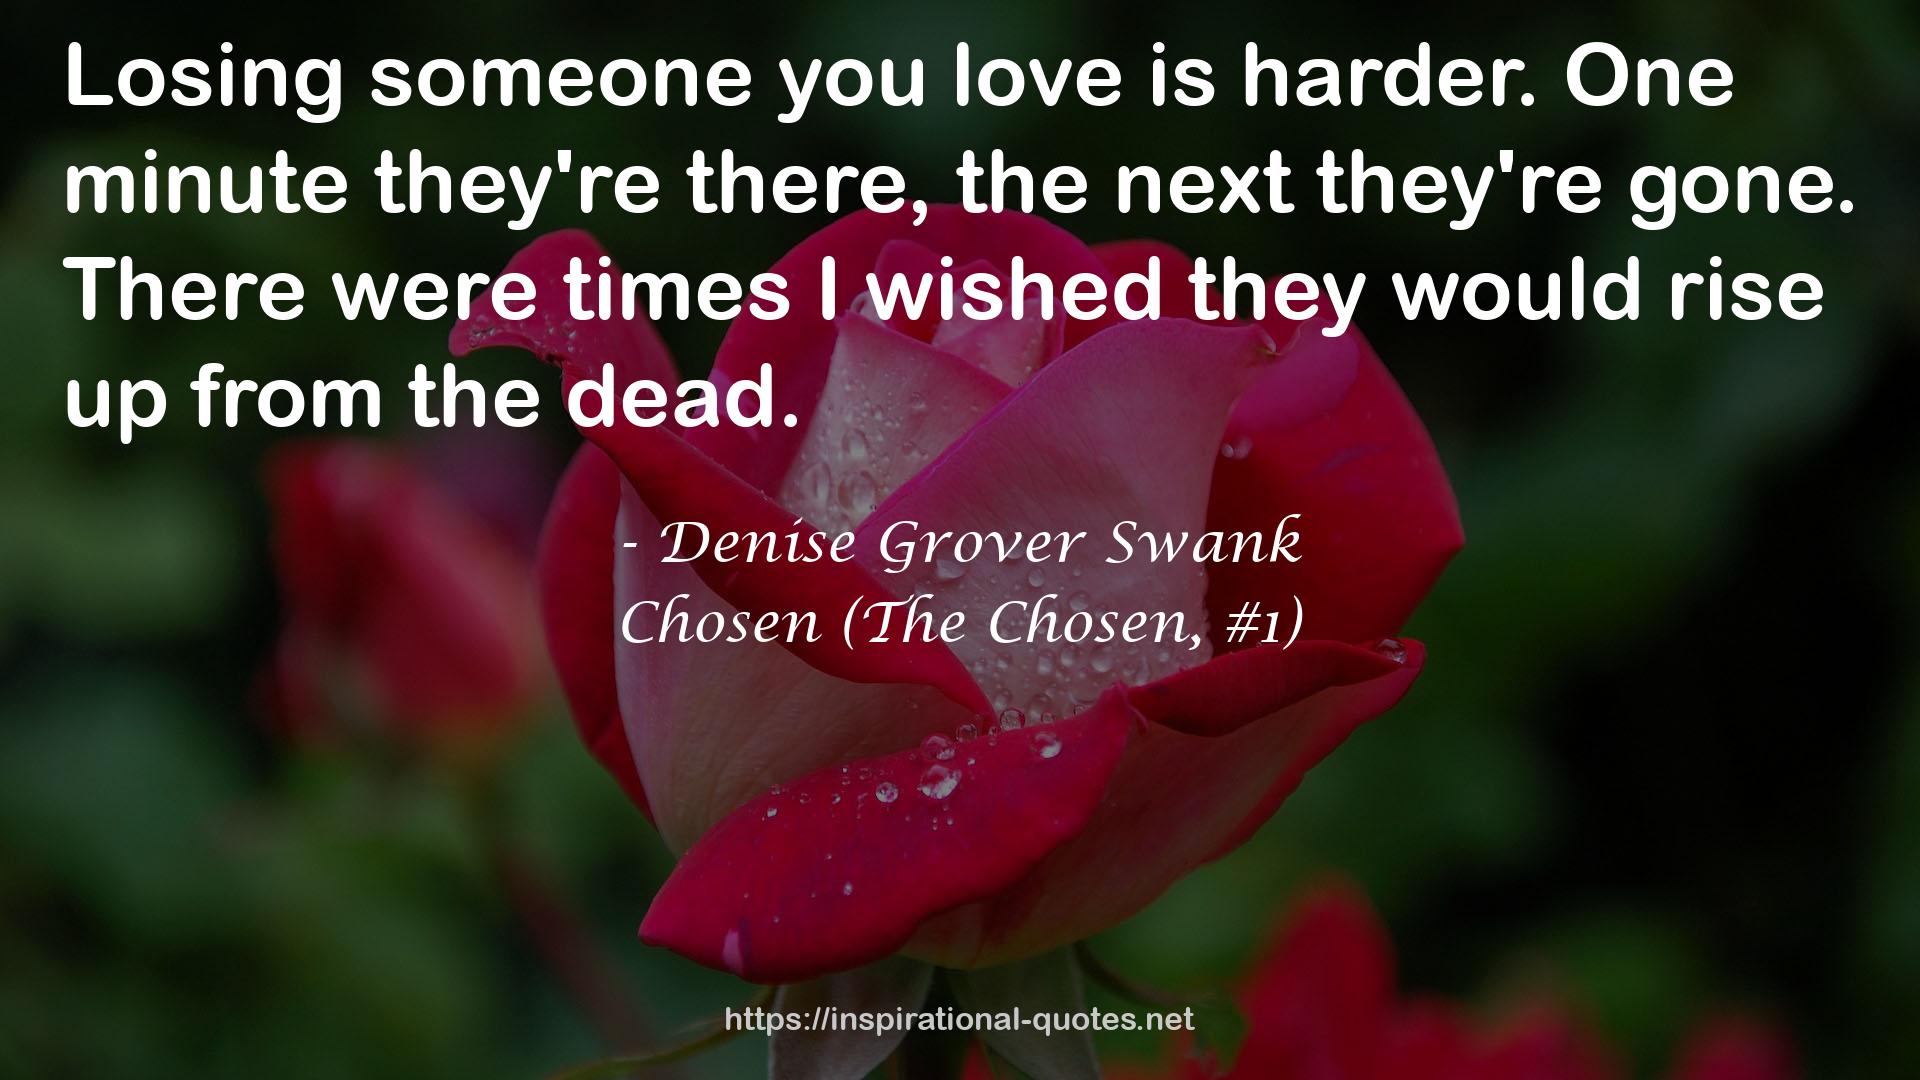 Denise Grover Swank QUOTES